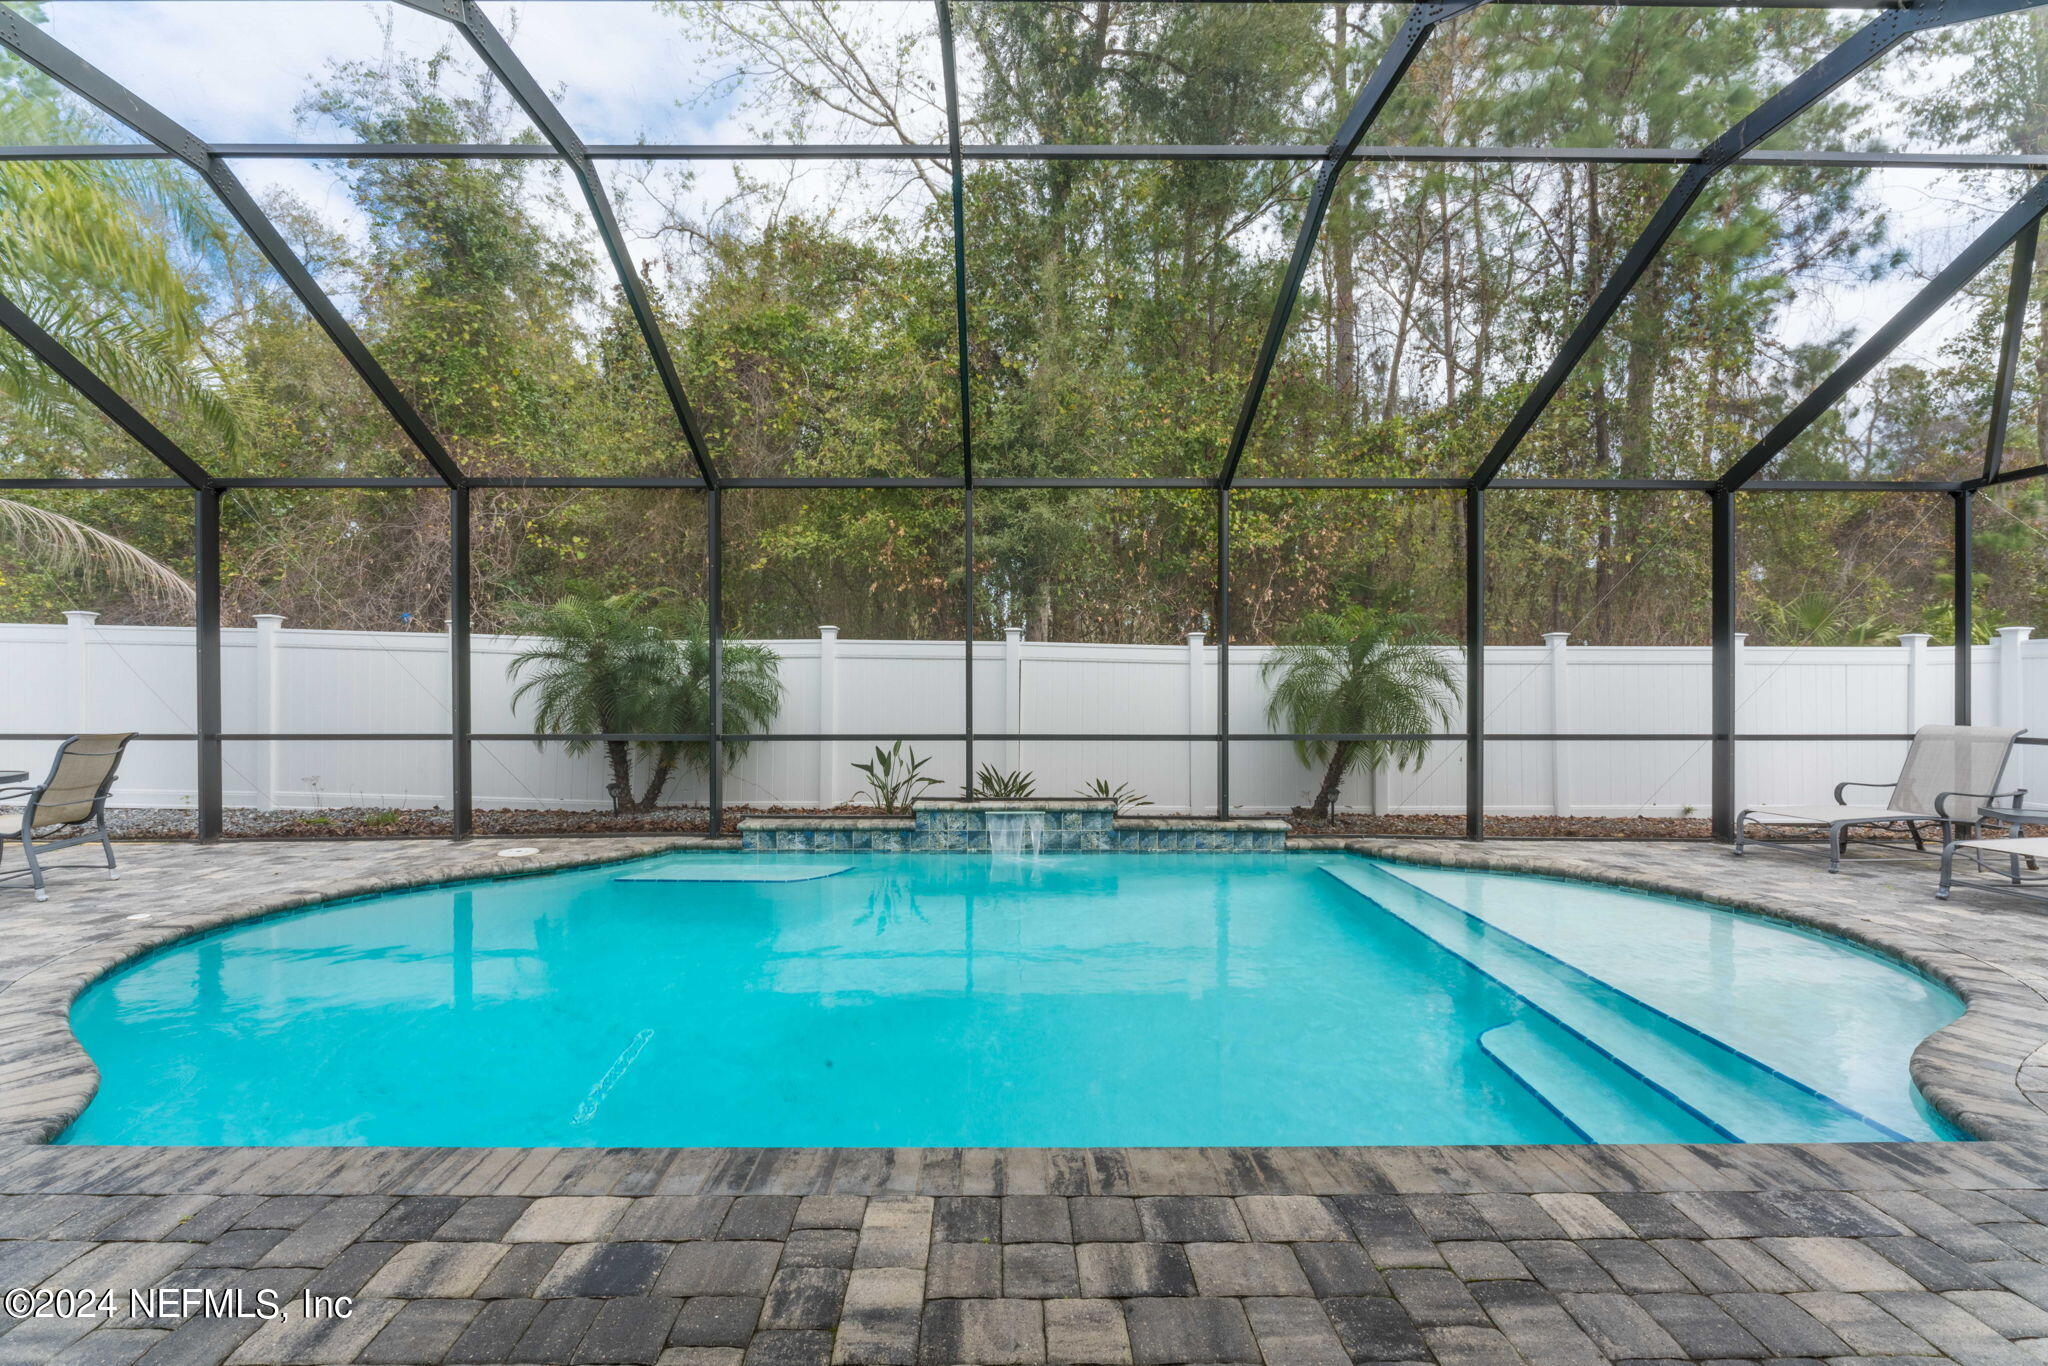 a swimming pool with outdoor outdoor seating and yard